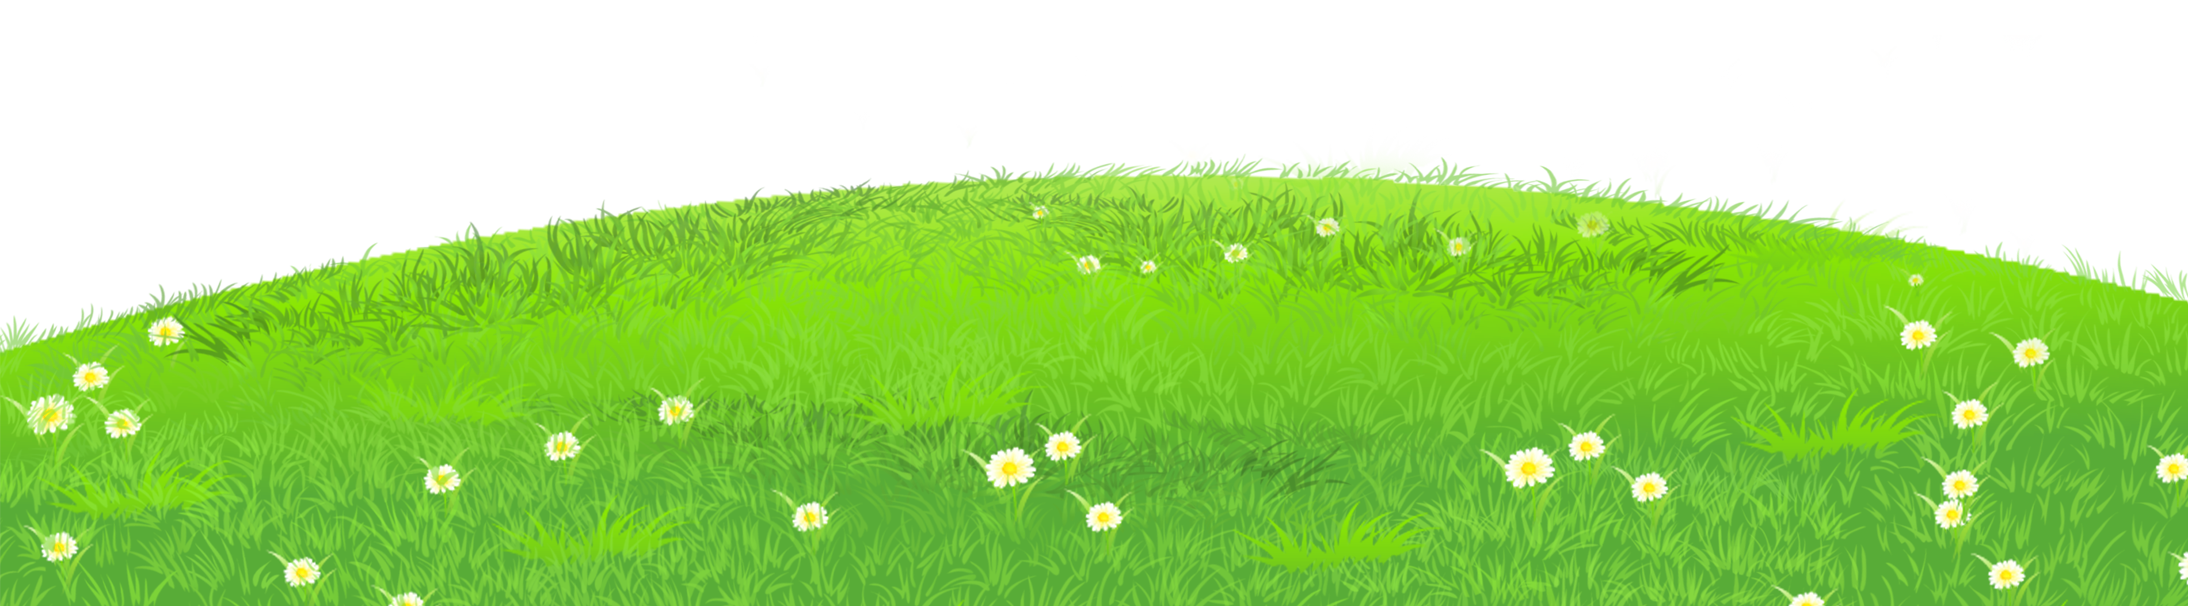 Grass clipart free images